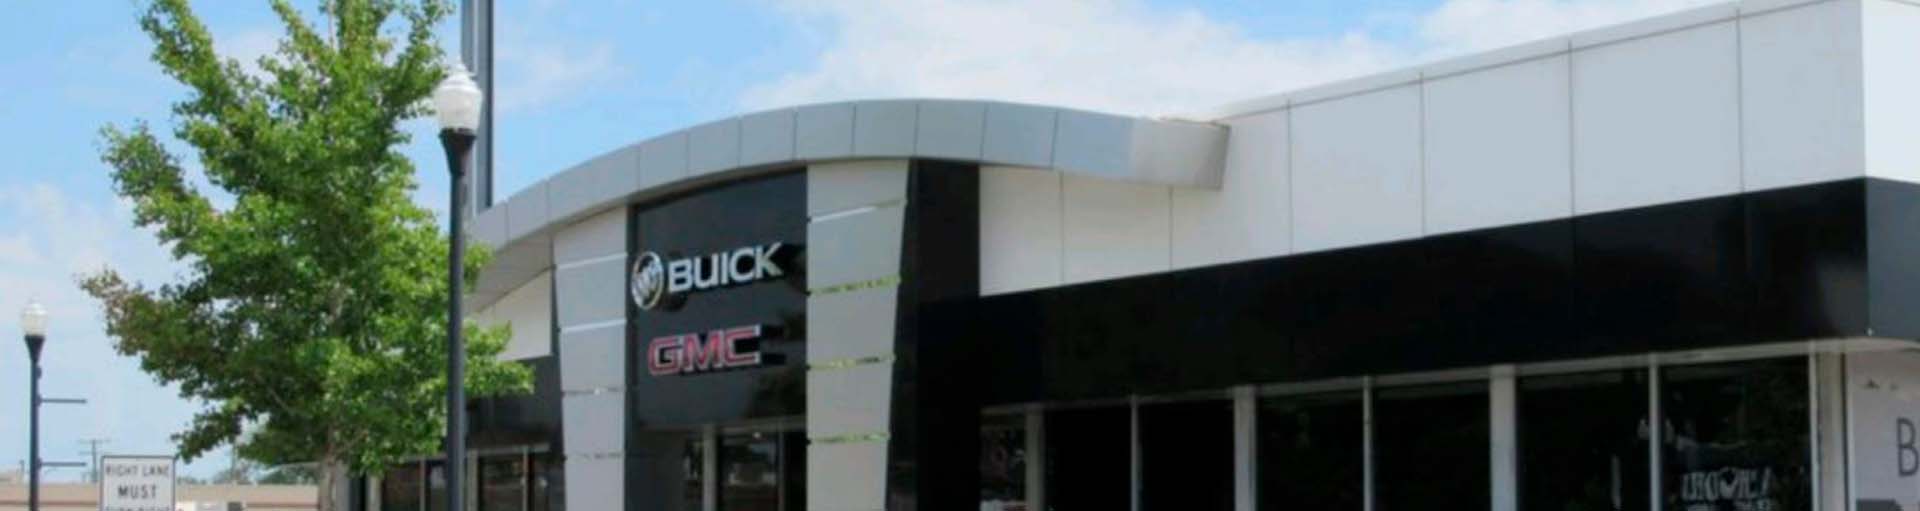 image of LaFontaine Buick GMC